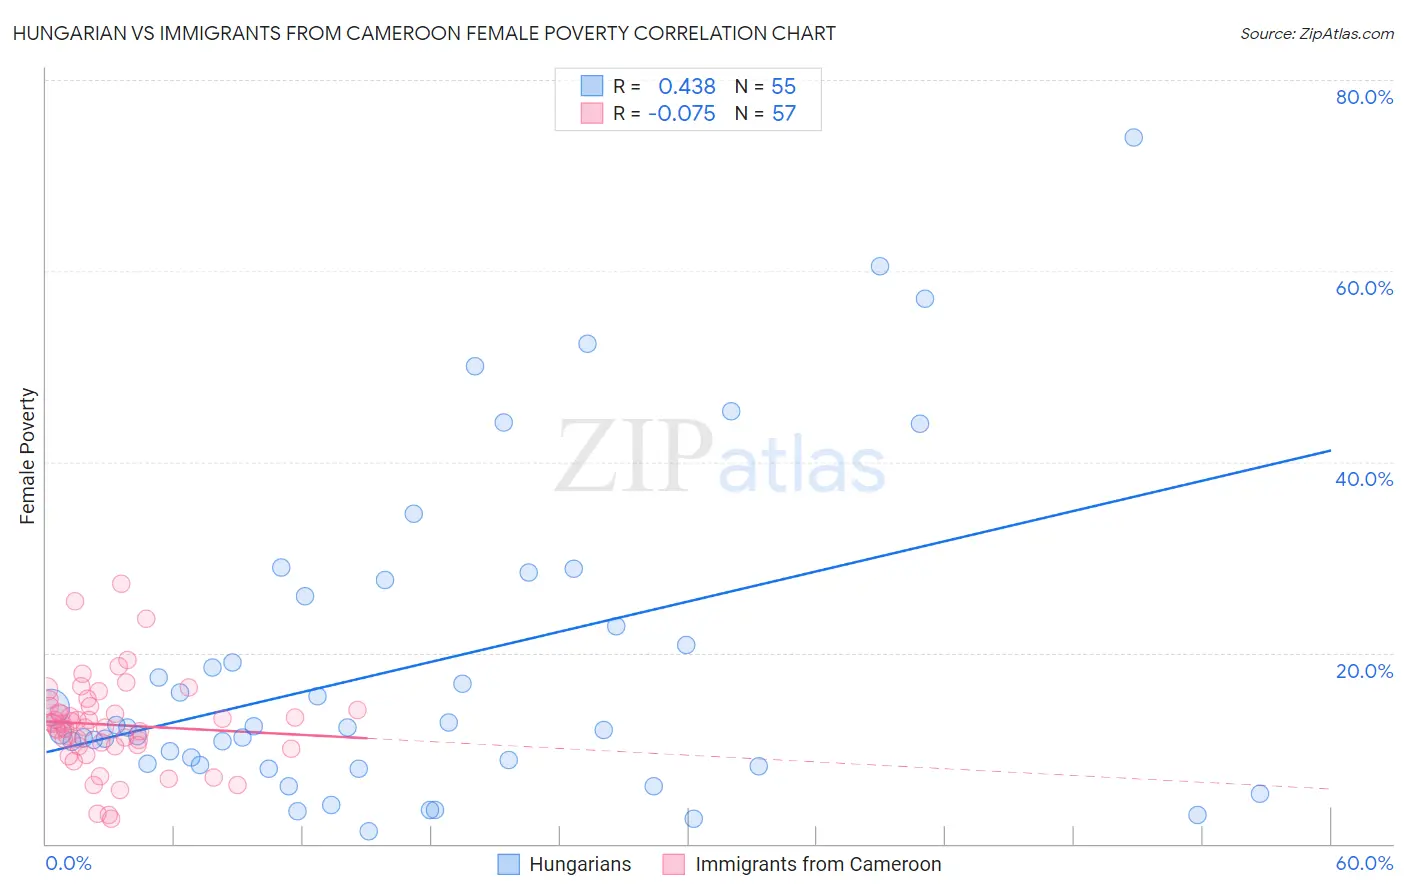 Hungarian vs Immigrants from Cameroon Female Poverty